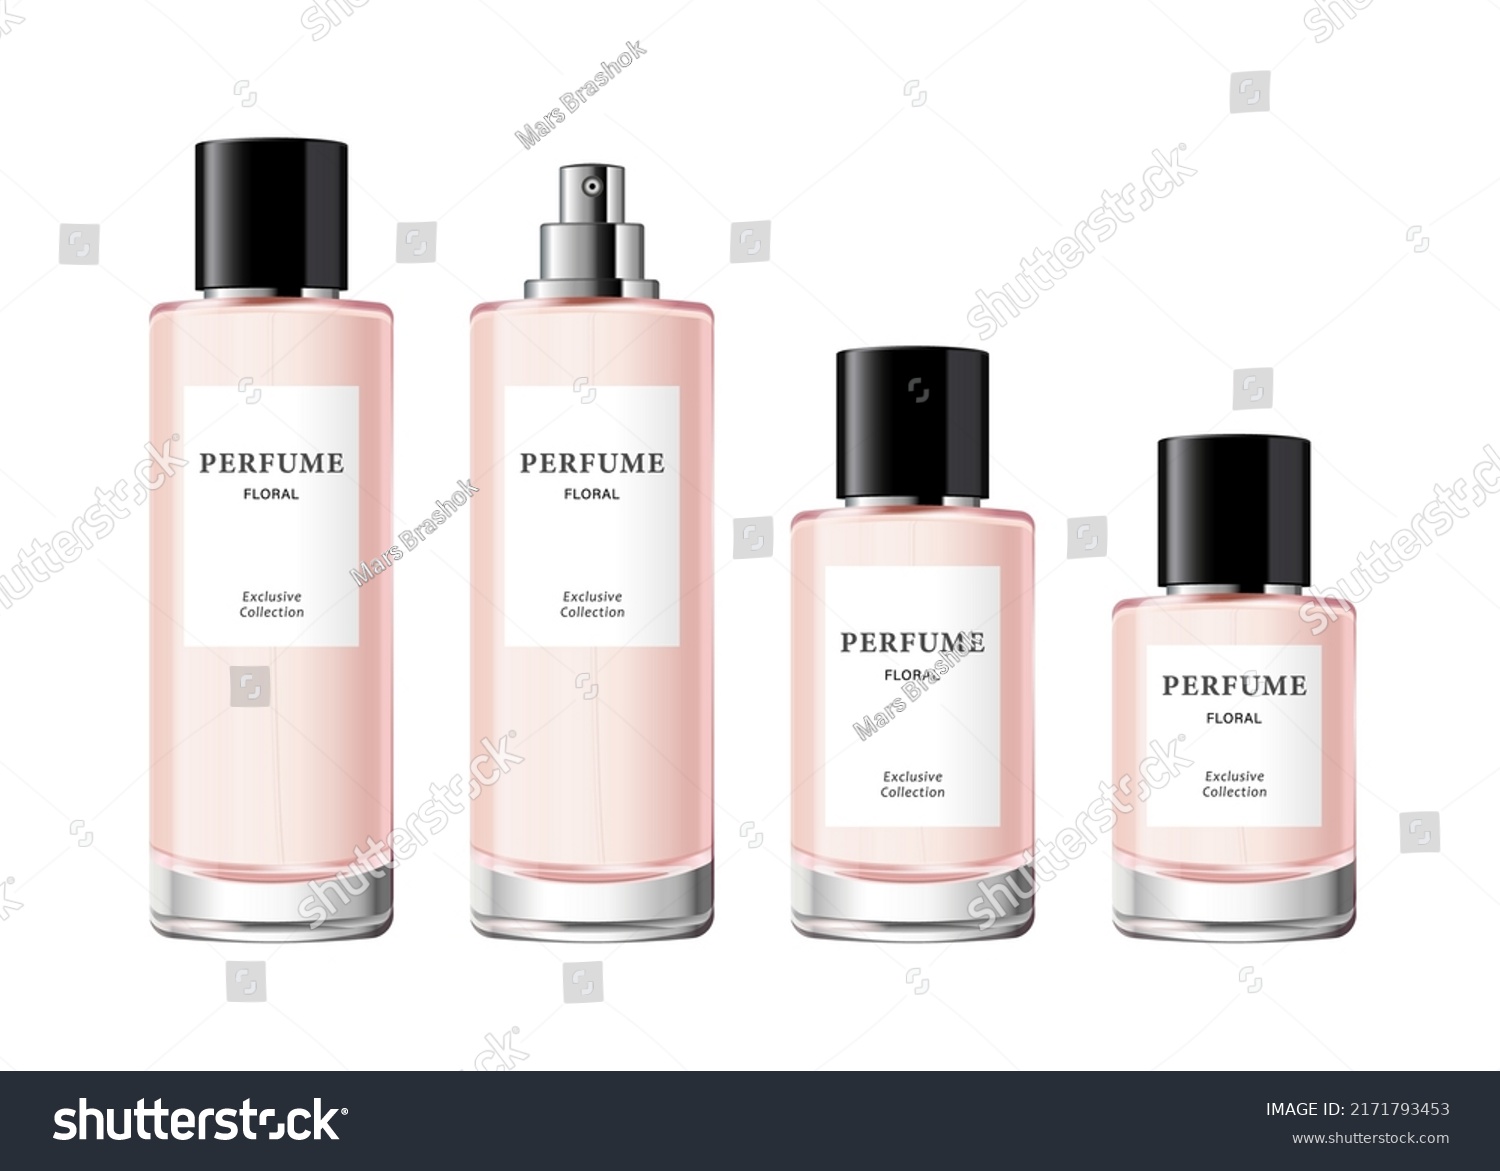 SVG of Perfume glass bottle template. Mockup of cylinder minimalist fragrance package in different volumes, with label, steel sprayer and black cap. 3d vector illustration isolated on white background.  svg